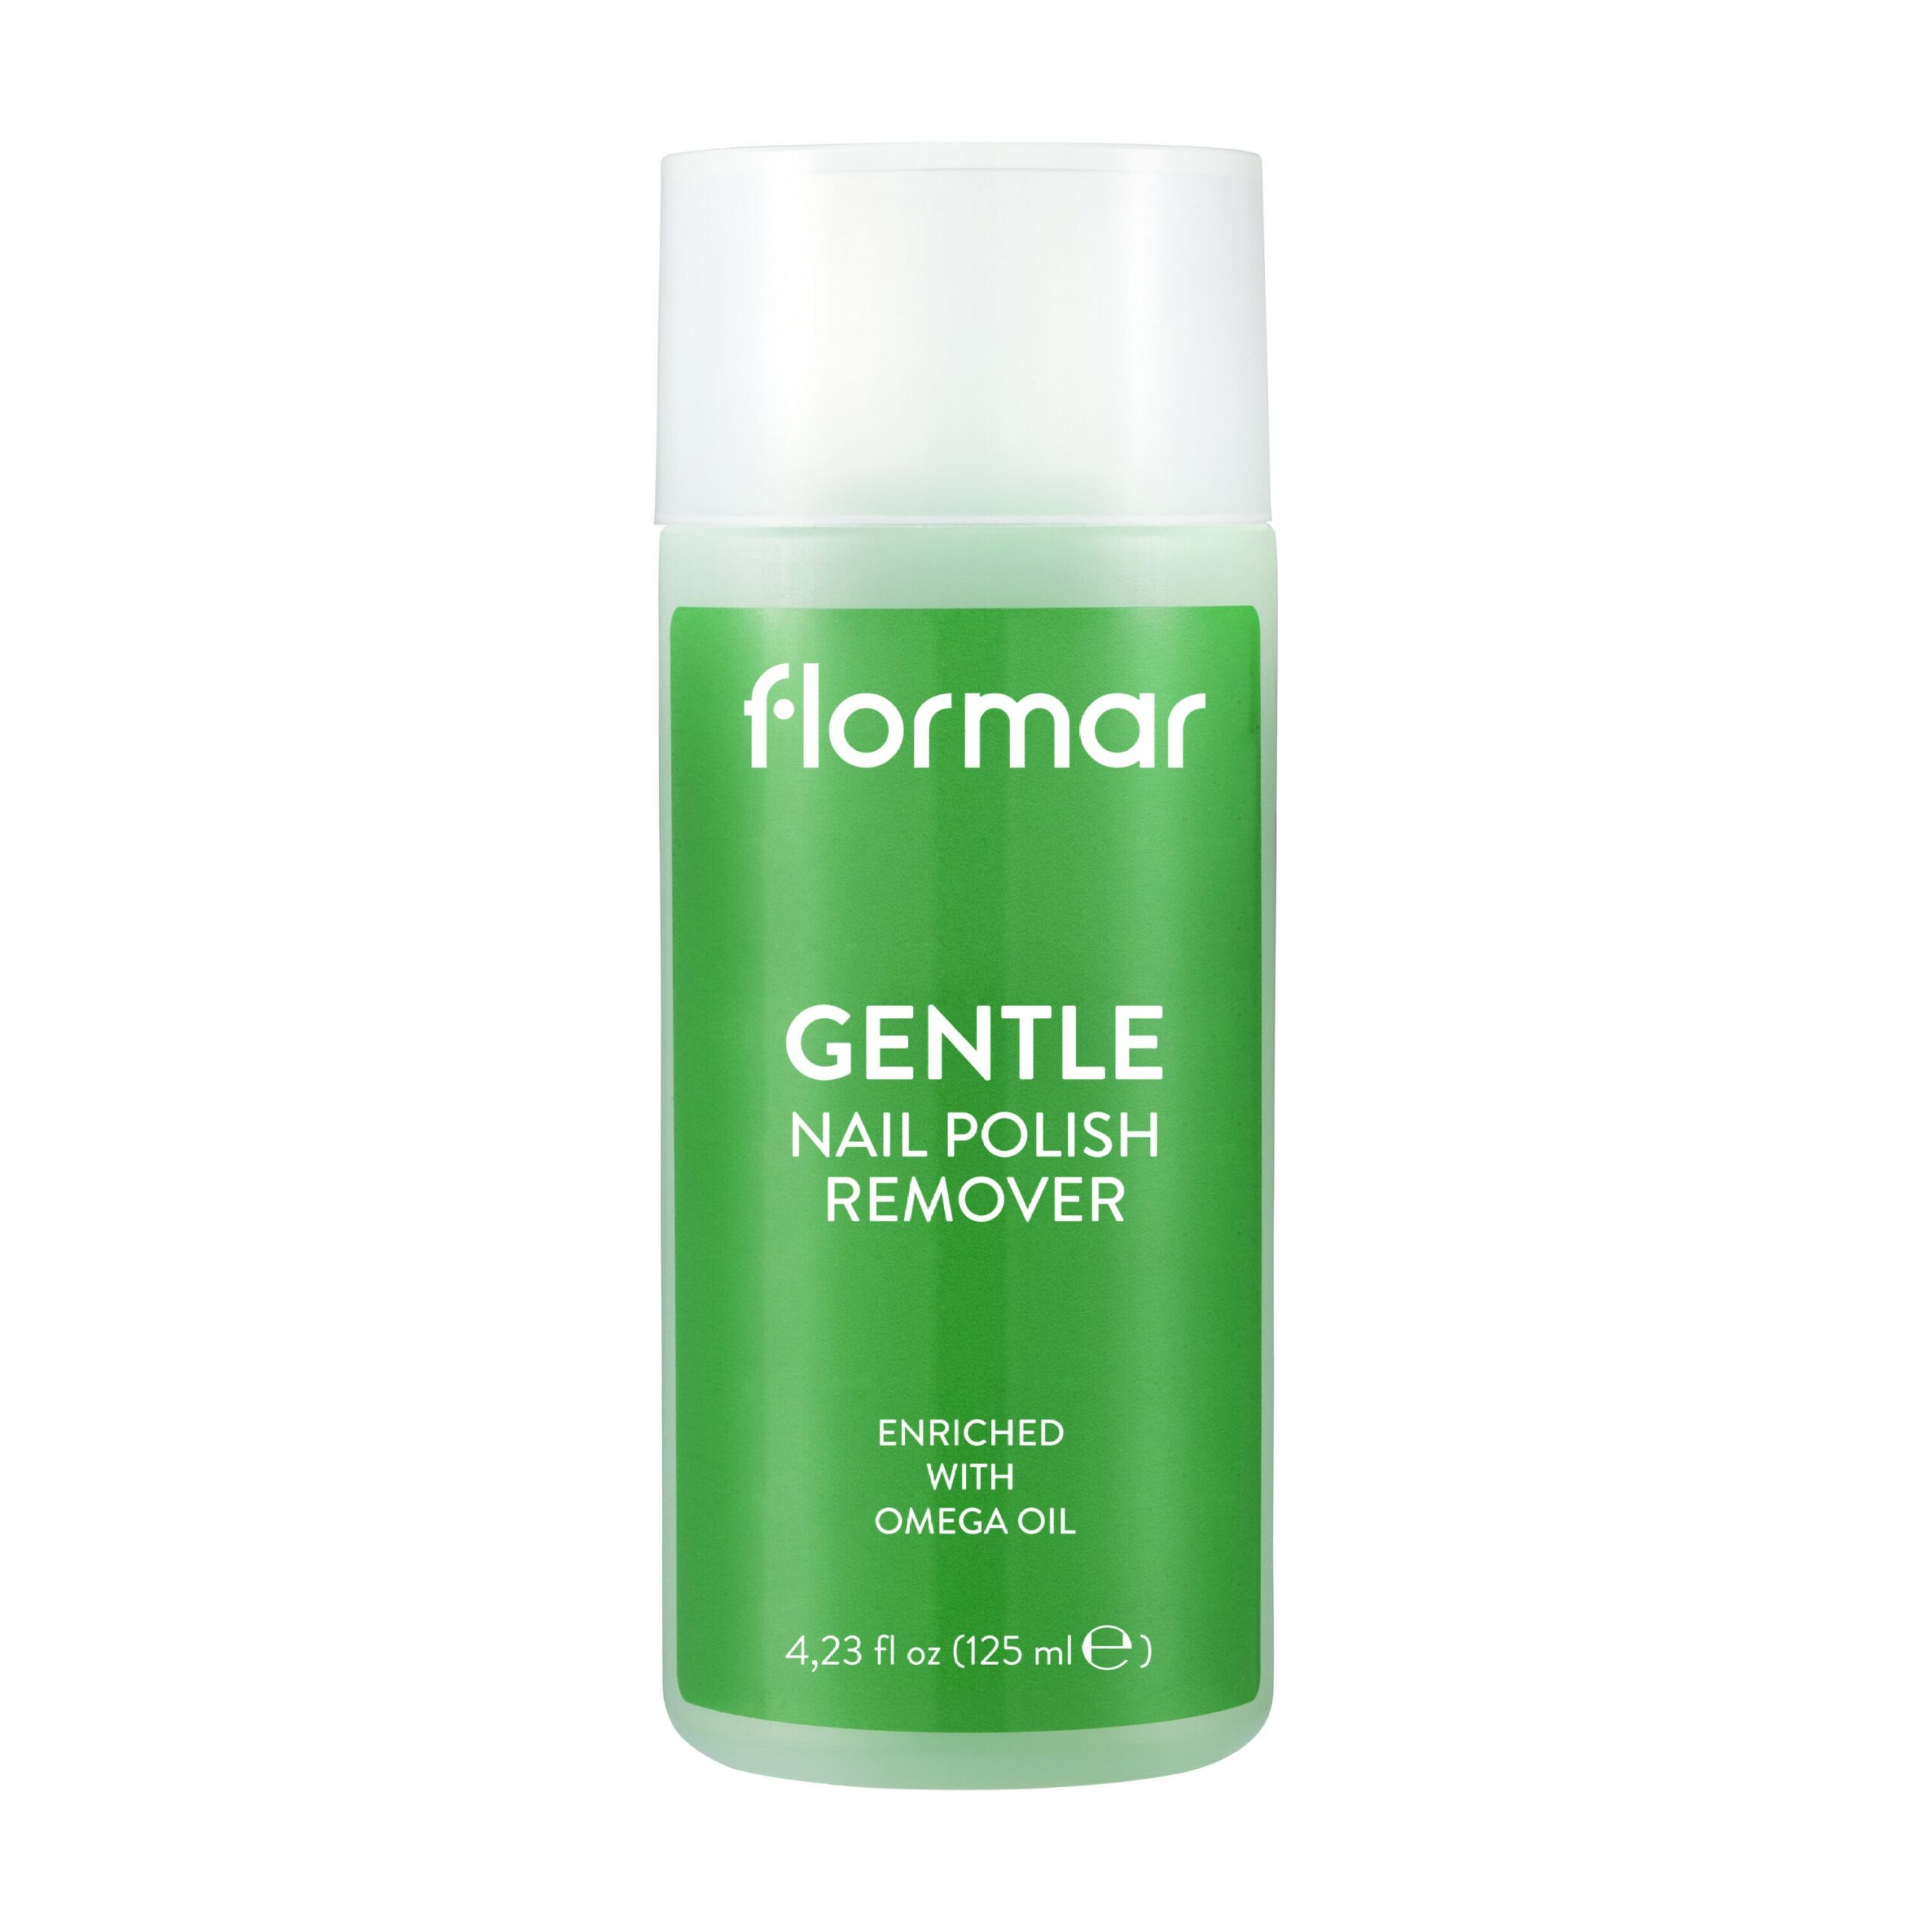 Flormar NAIL POLISH REMOVER Gentle